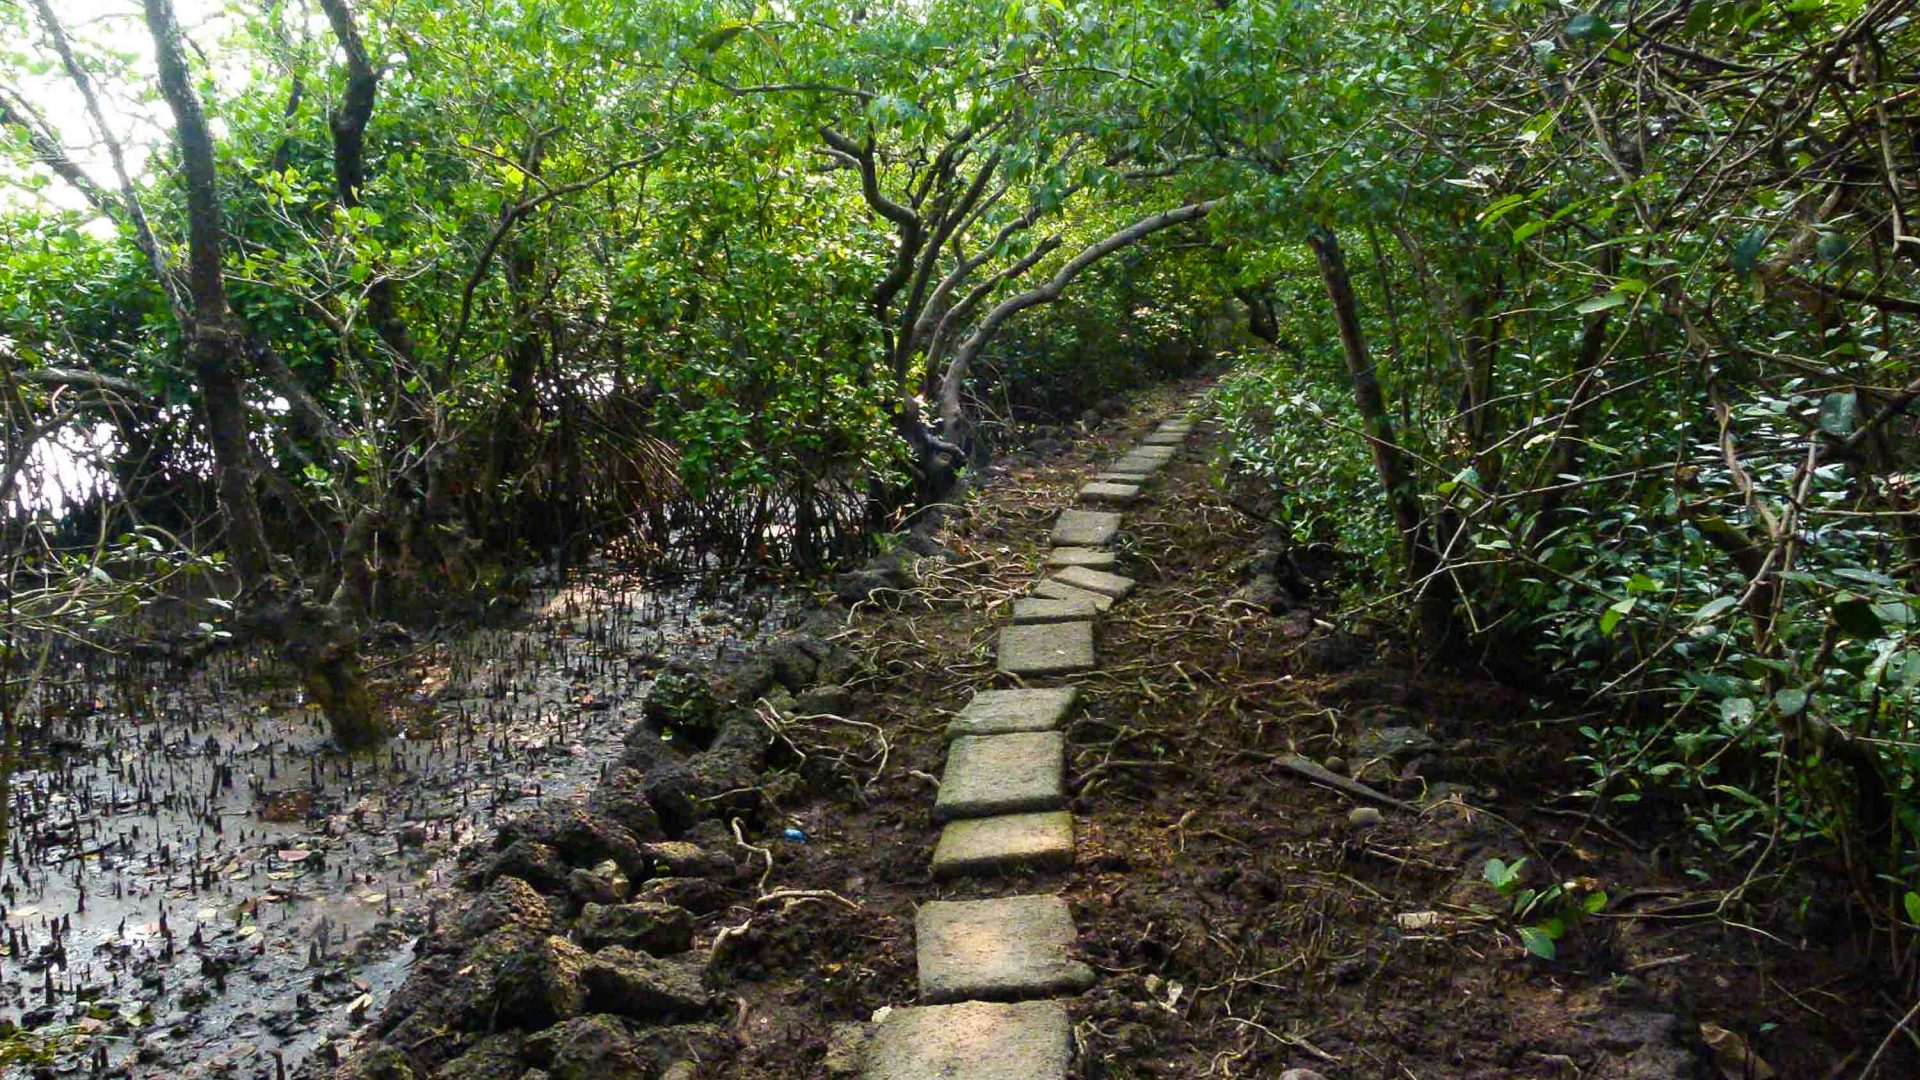 A walkway past mangroves and through trees.